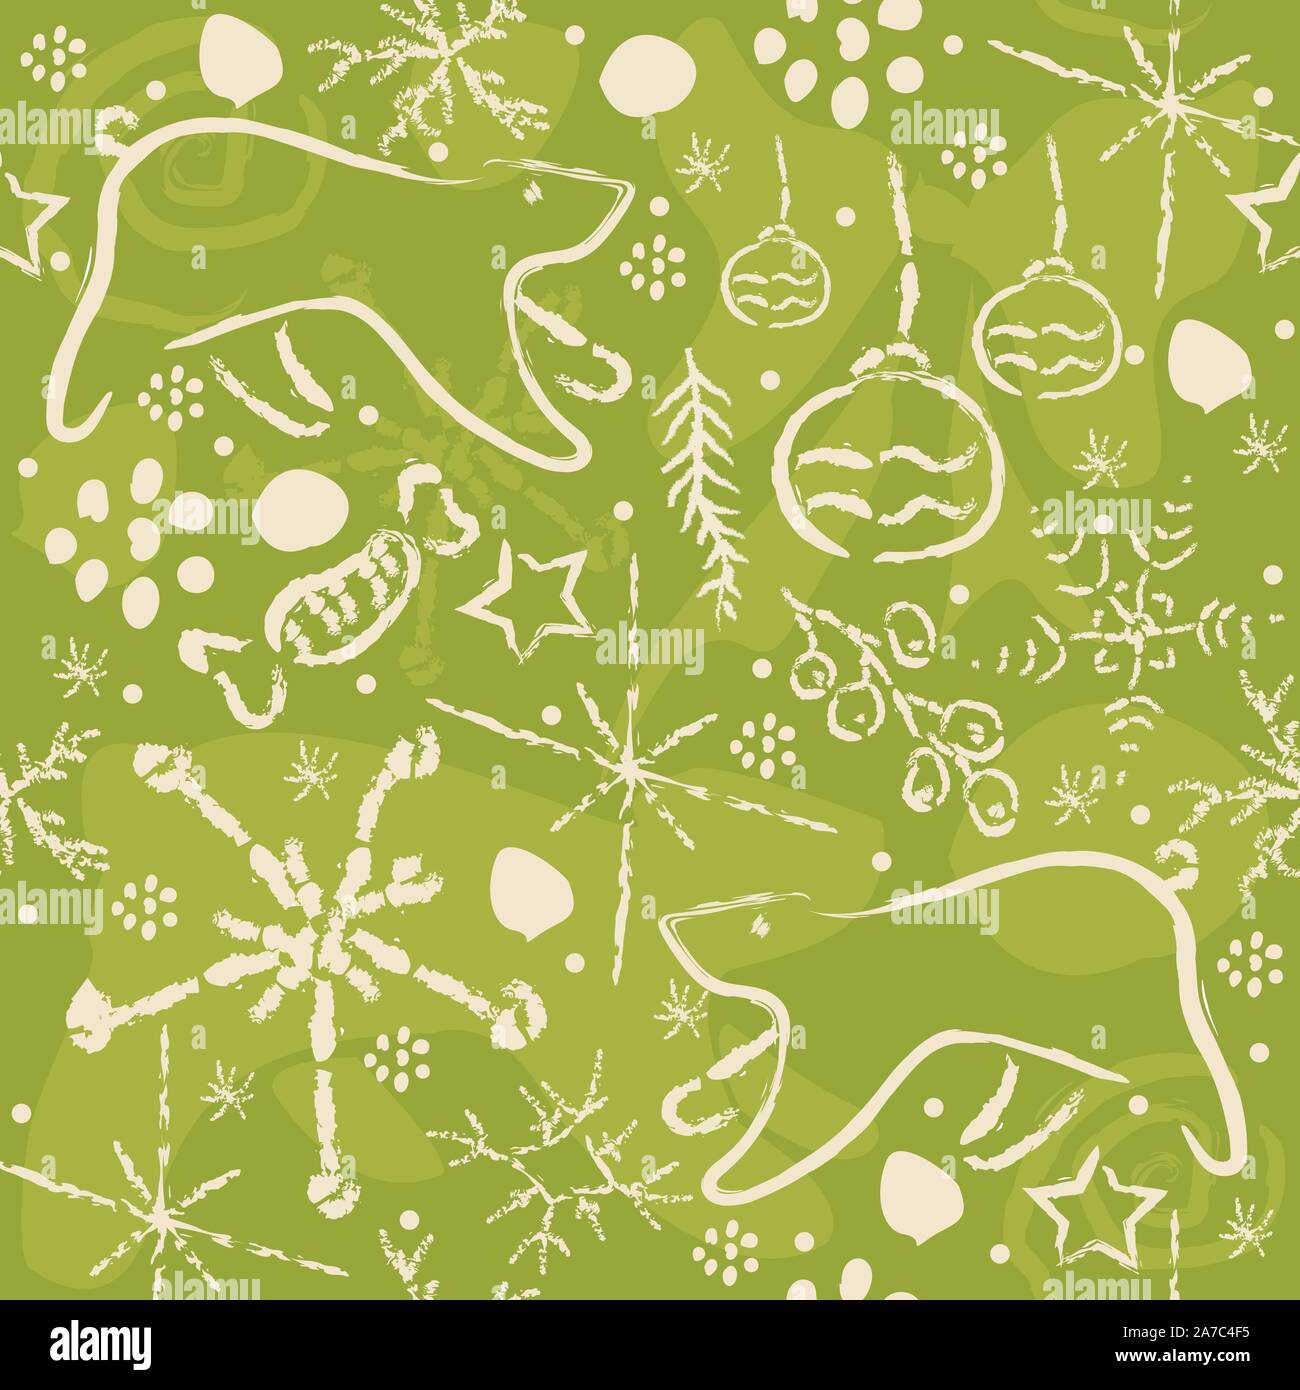 Cute Pattern with winter doodles on green background with shades.Great for prints for t-shirts, kitchen utensils(like plates, cups), pillows, blankets Stock Vector